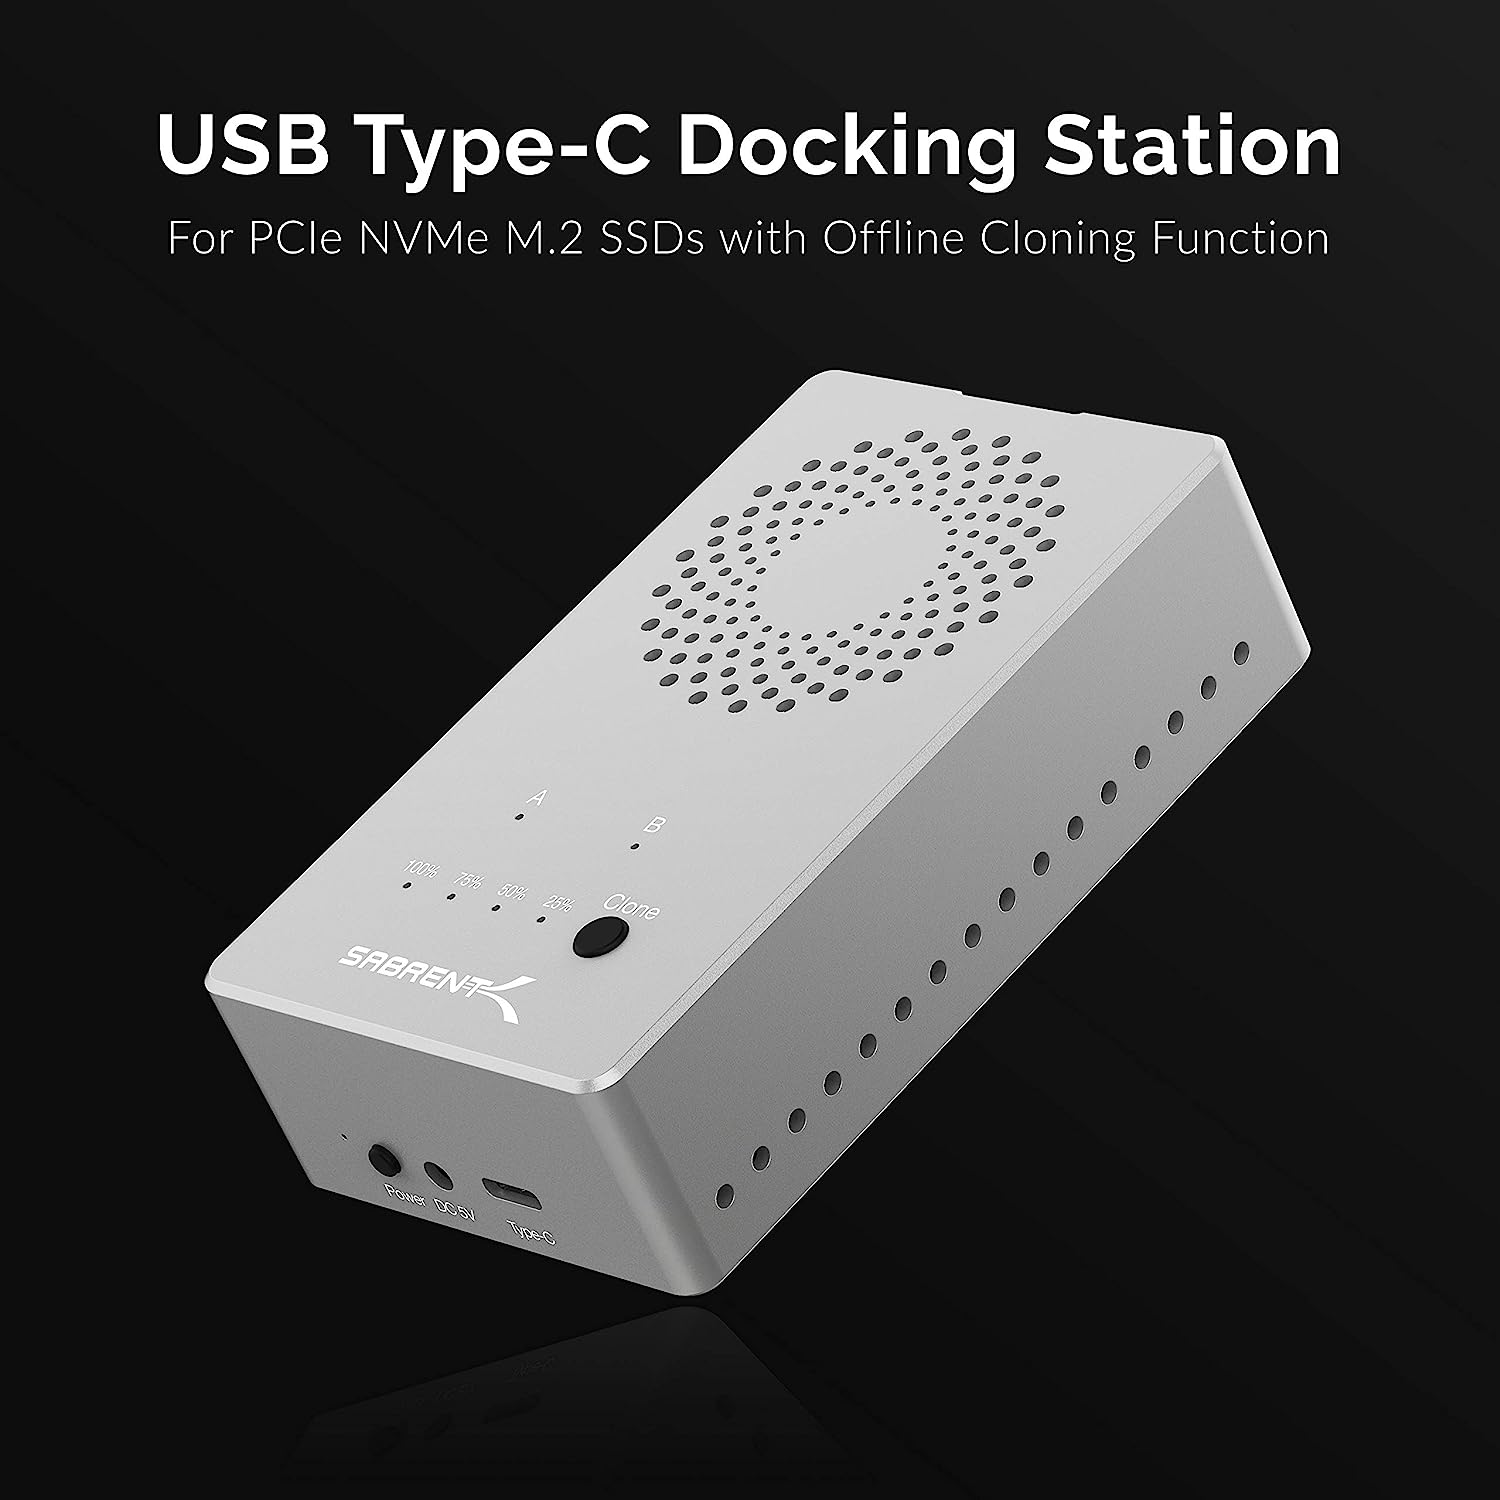 SABRENT Tool Free USB Type C Dual Docking Station for PCIe NVMe M.2 SSDs with Offline Cloning Function (EC-SSD2)